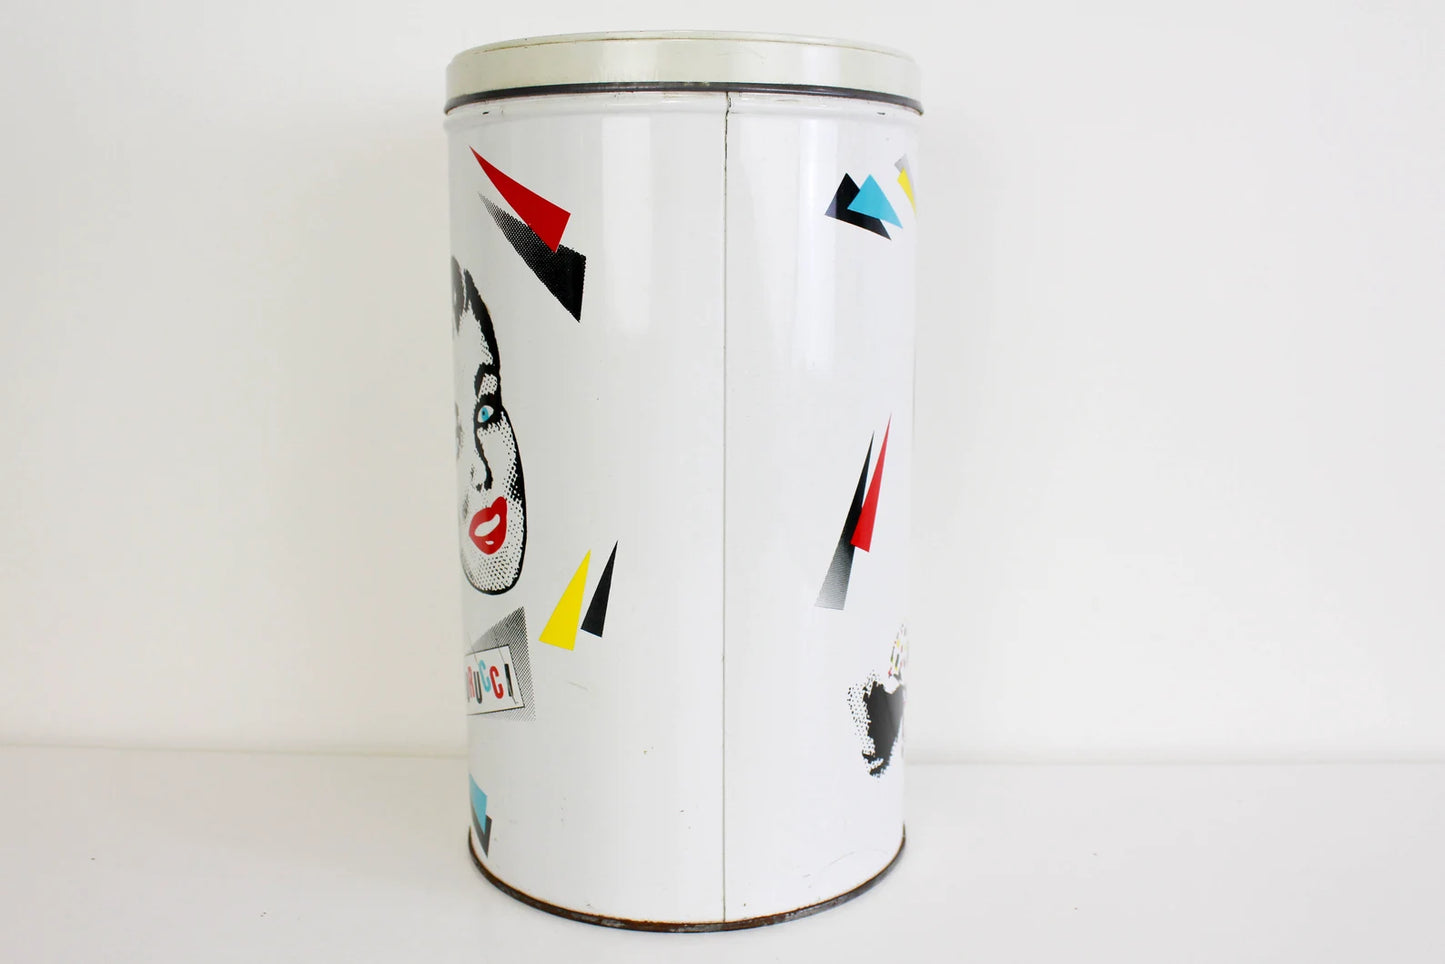 1980s Fiorucci Tin Can, Lichtenstein Style 50s Girl Illustration, Cream and Black, Primary Colors, Vintage Fiorucci Canister